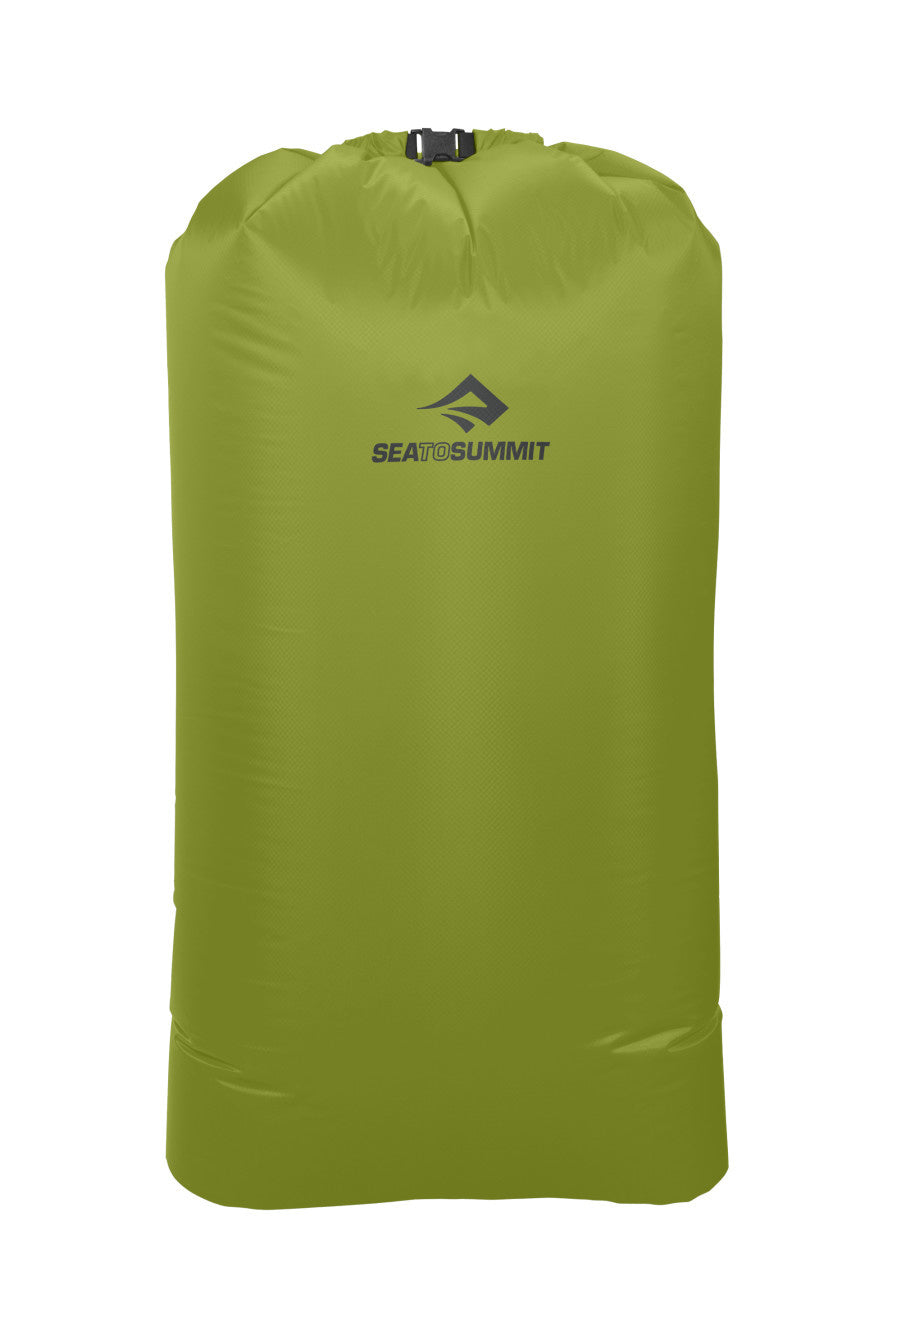 Sea To Summit Ultra-Sil Pack Liner 70L